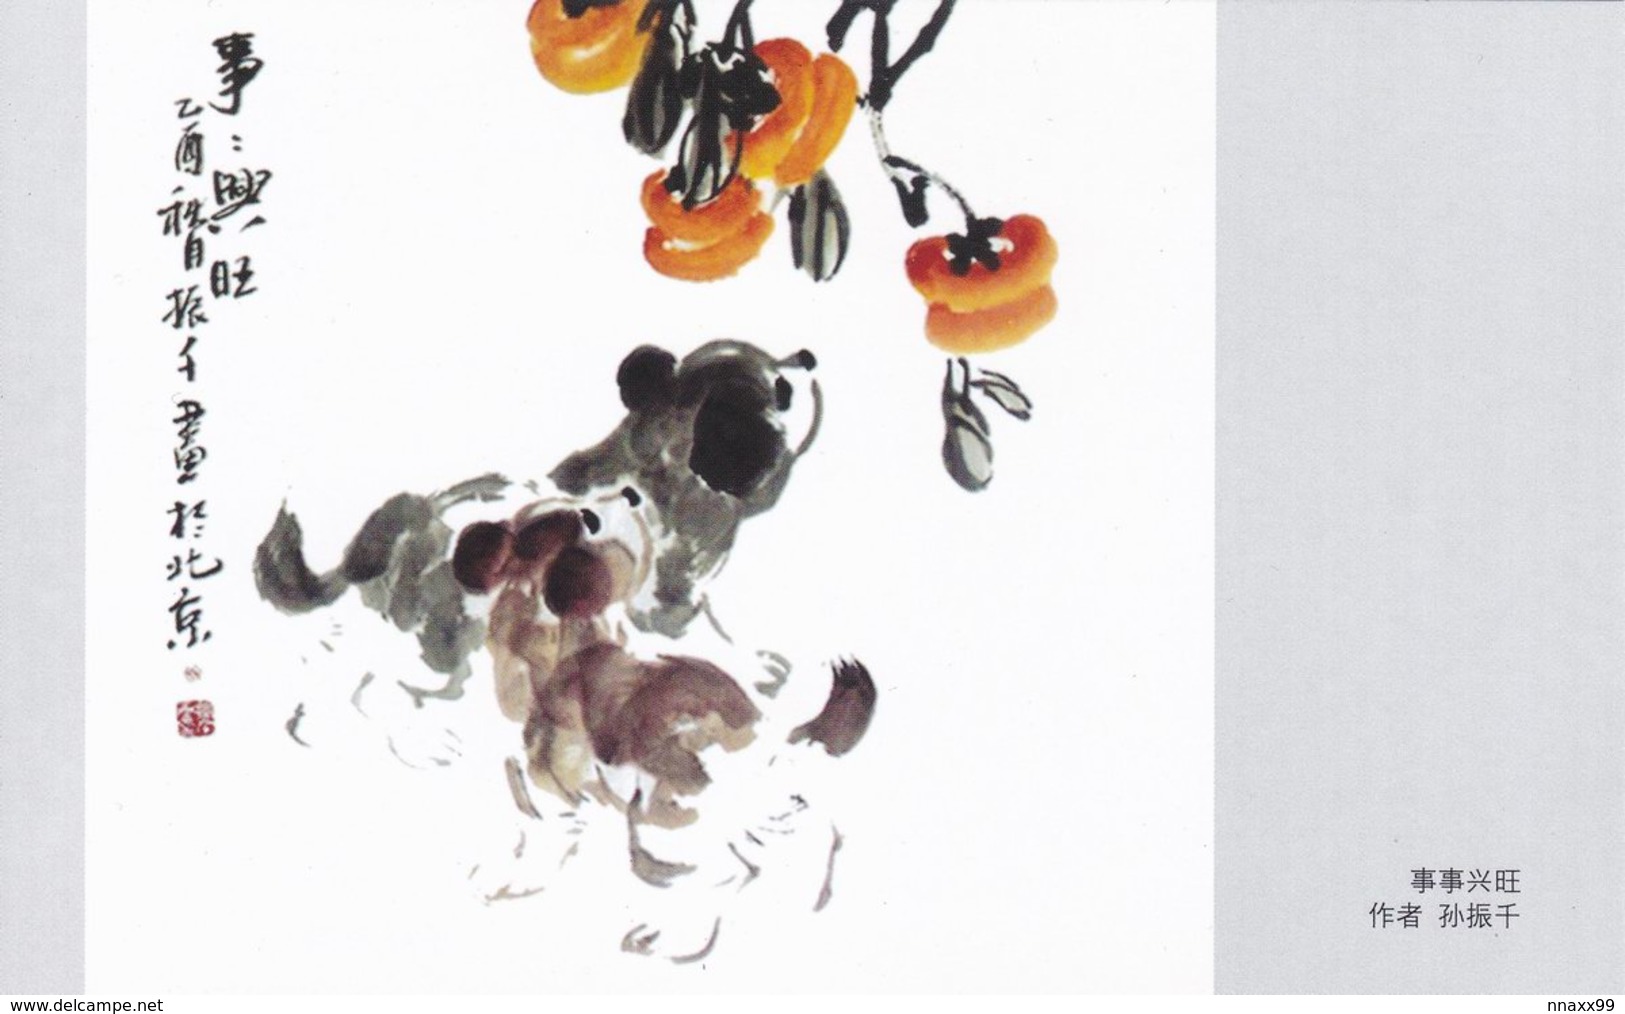 Art - Puppys With Persimmon, Chinese Painting Of SUN Zhenqian's Dog Series - Chiens